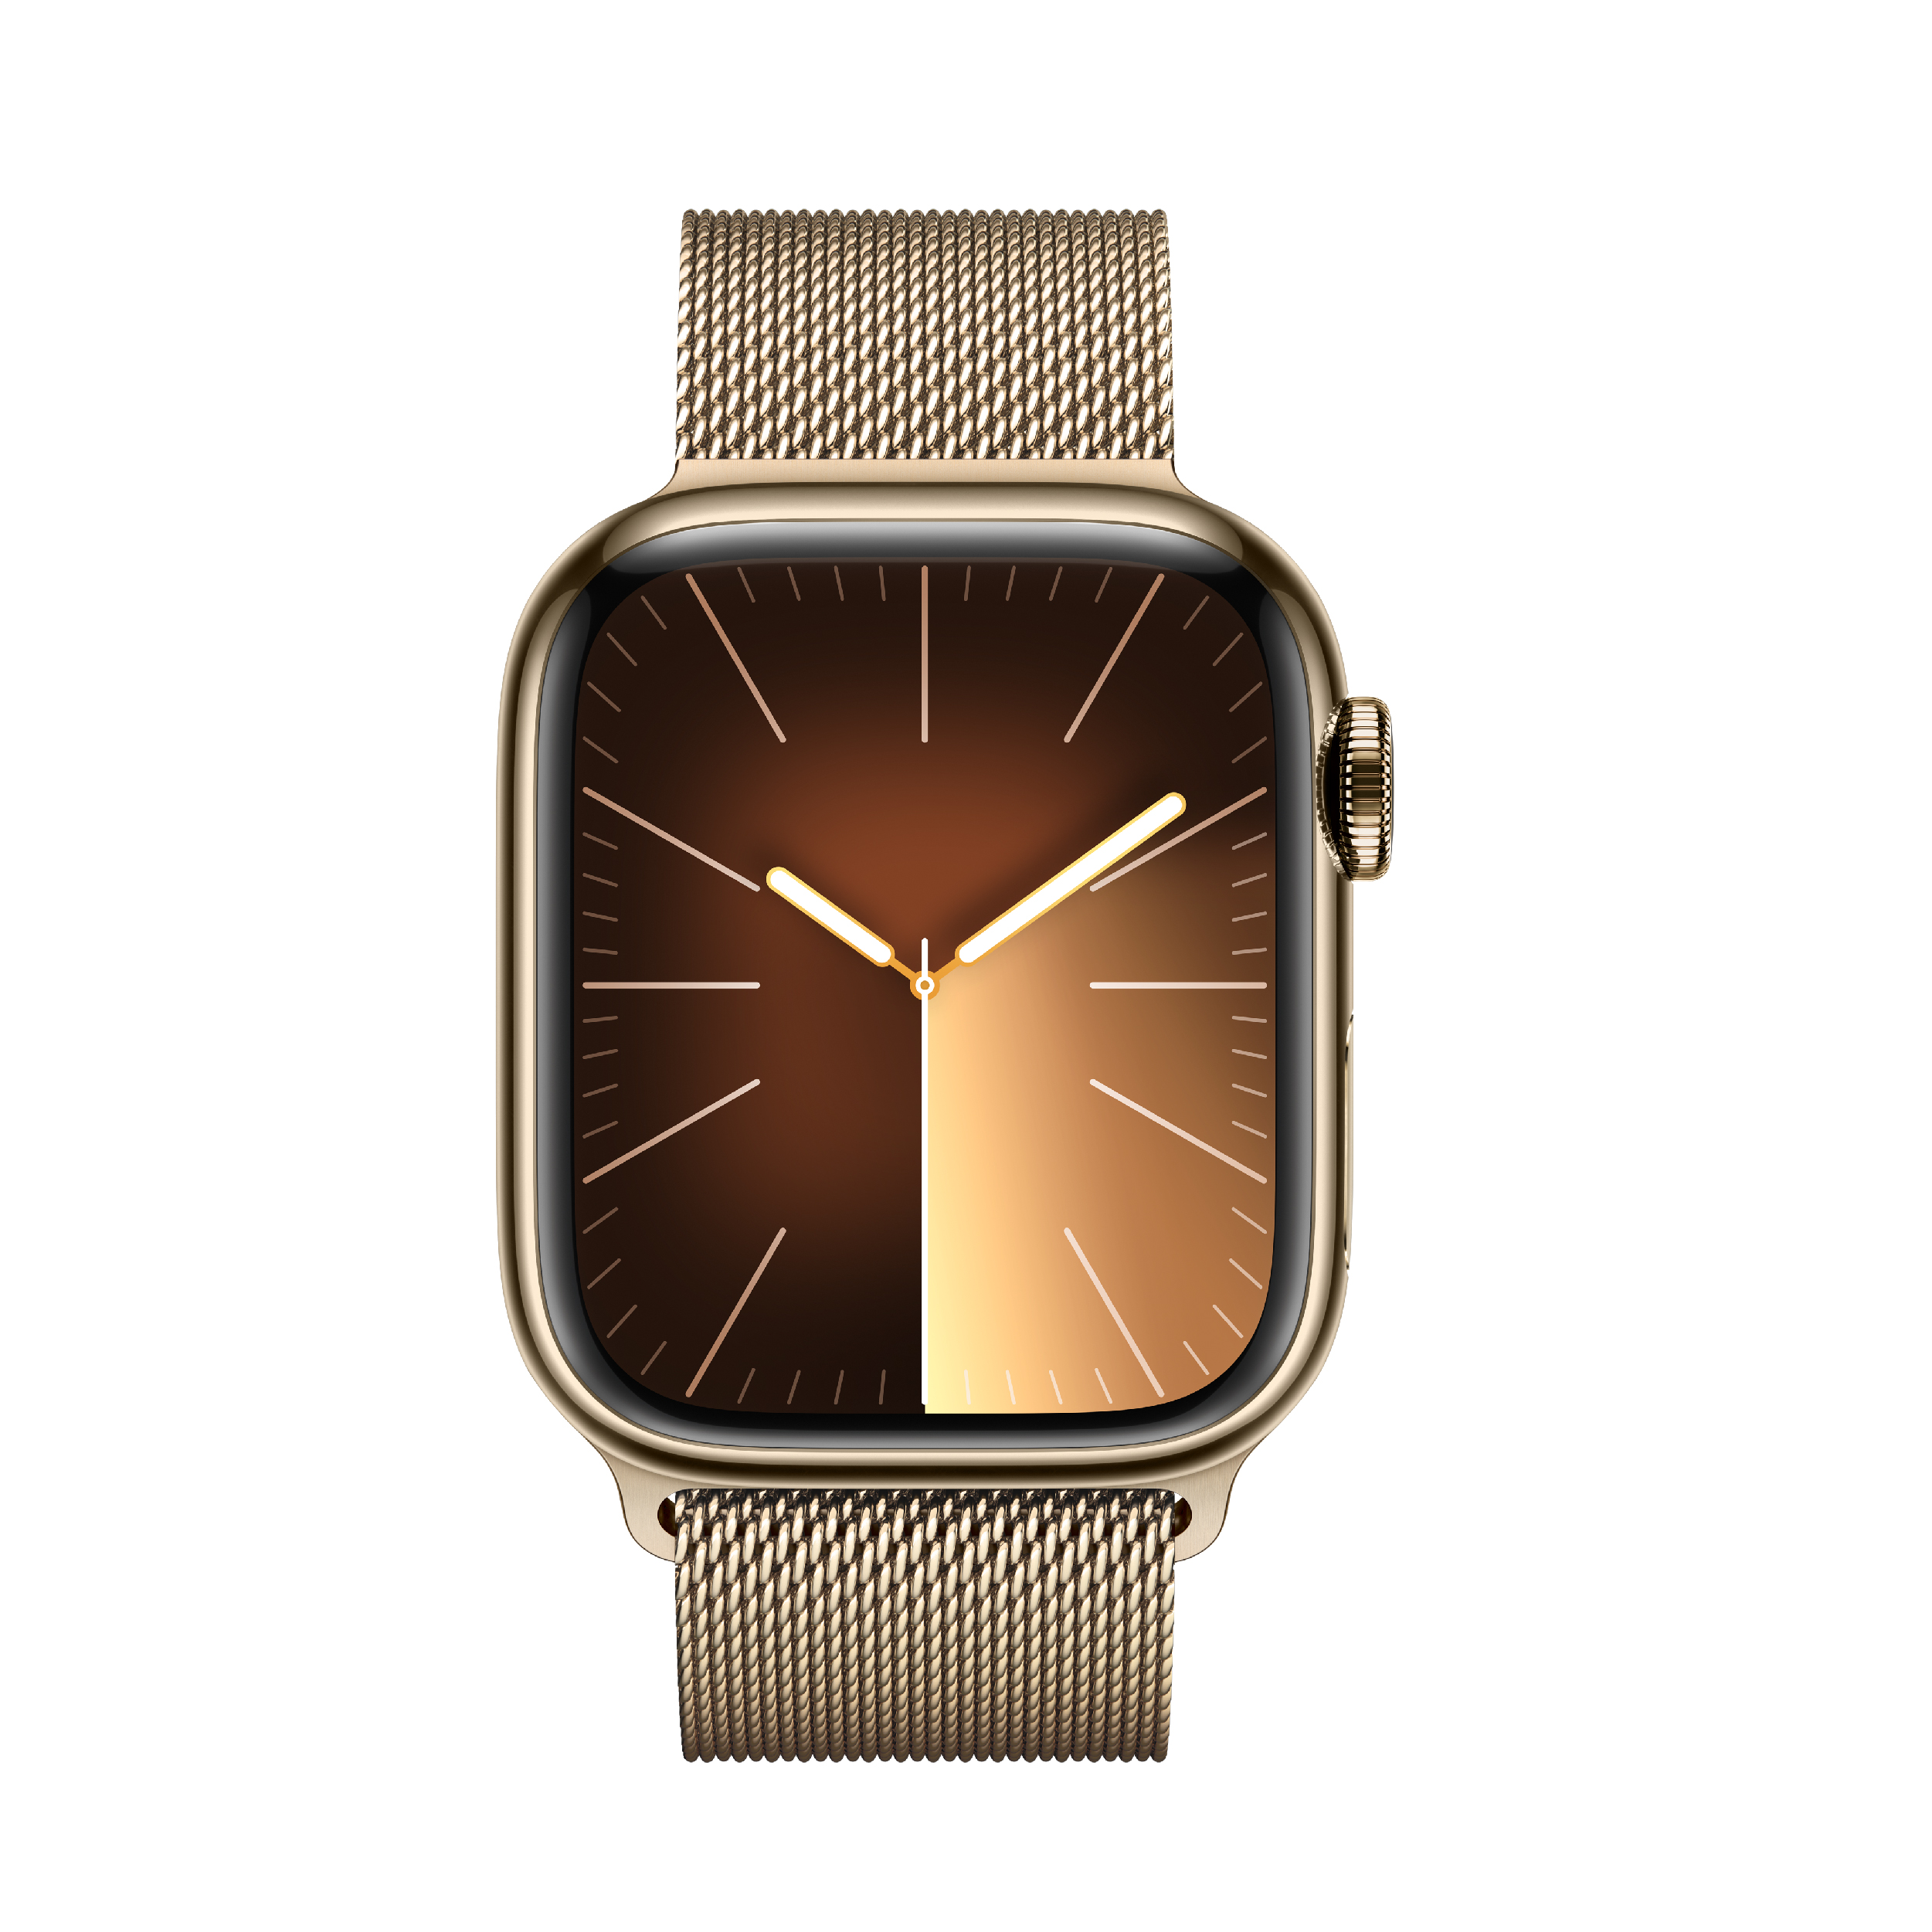 APPLE Smartwatch Series 9 GPS + Cellular 41mm, Gold Stainless Steel with Gold Milanese Loop Strap